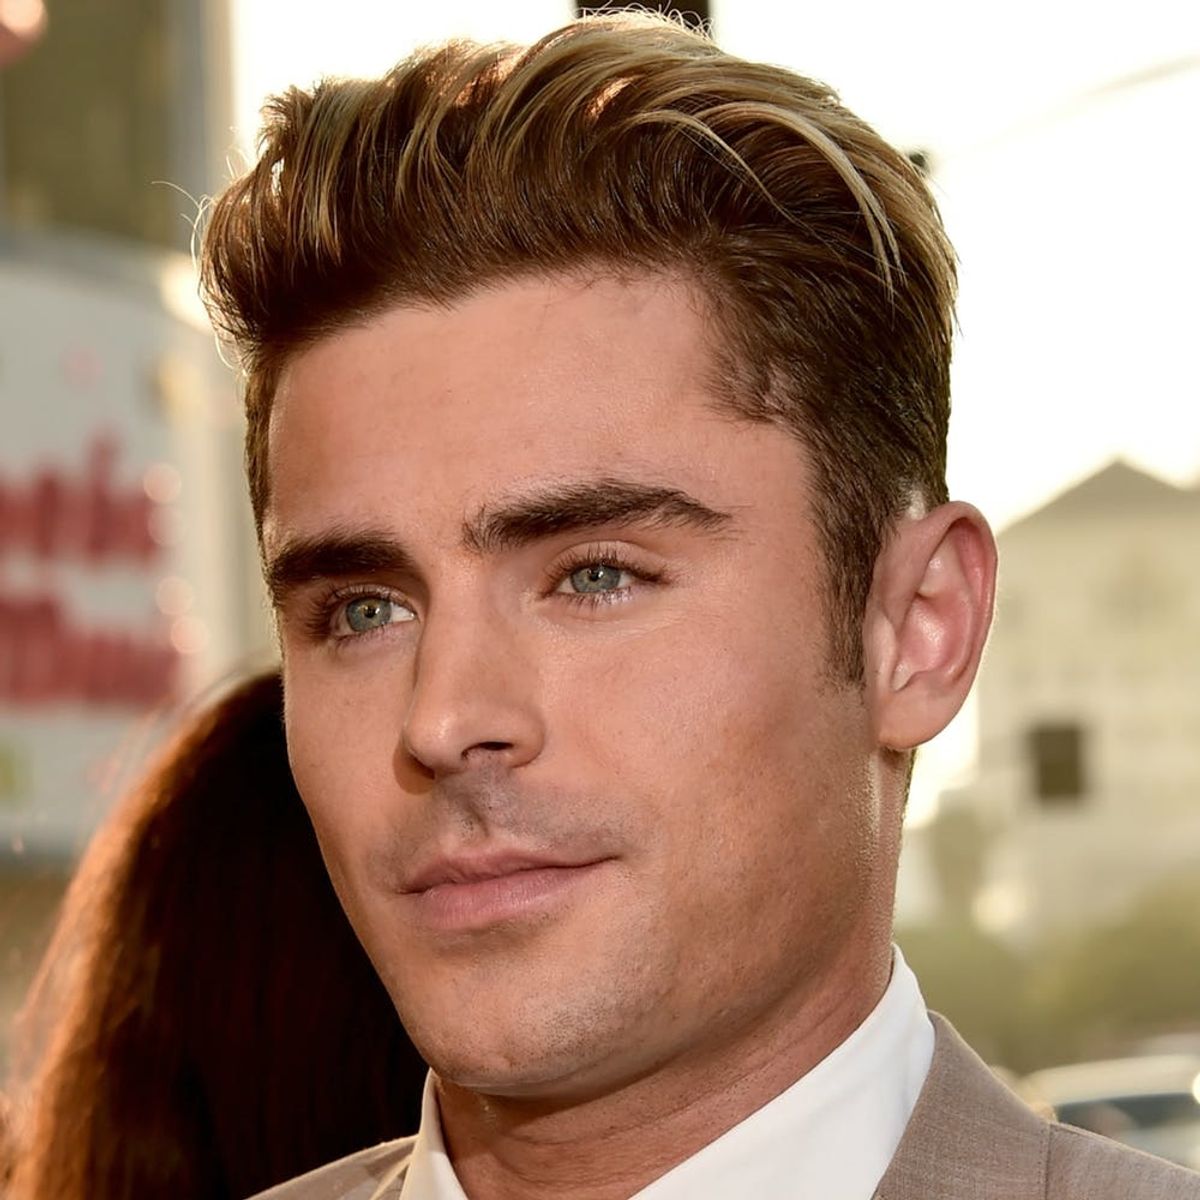 OMG! Zac Efron Is Here to Be Taylor Swift’s Next Potential Beau